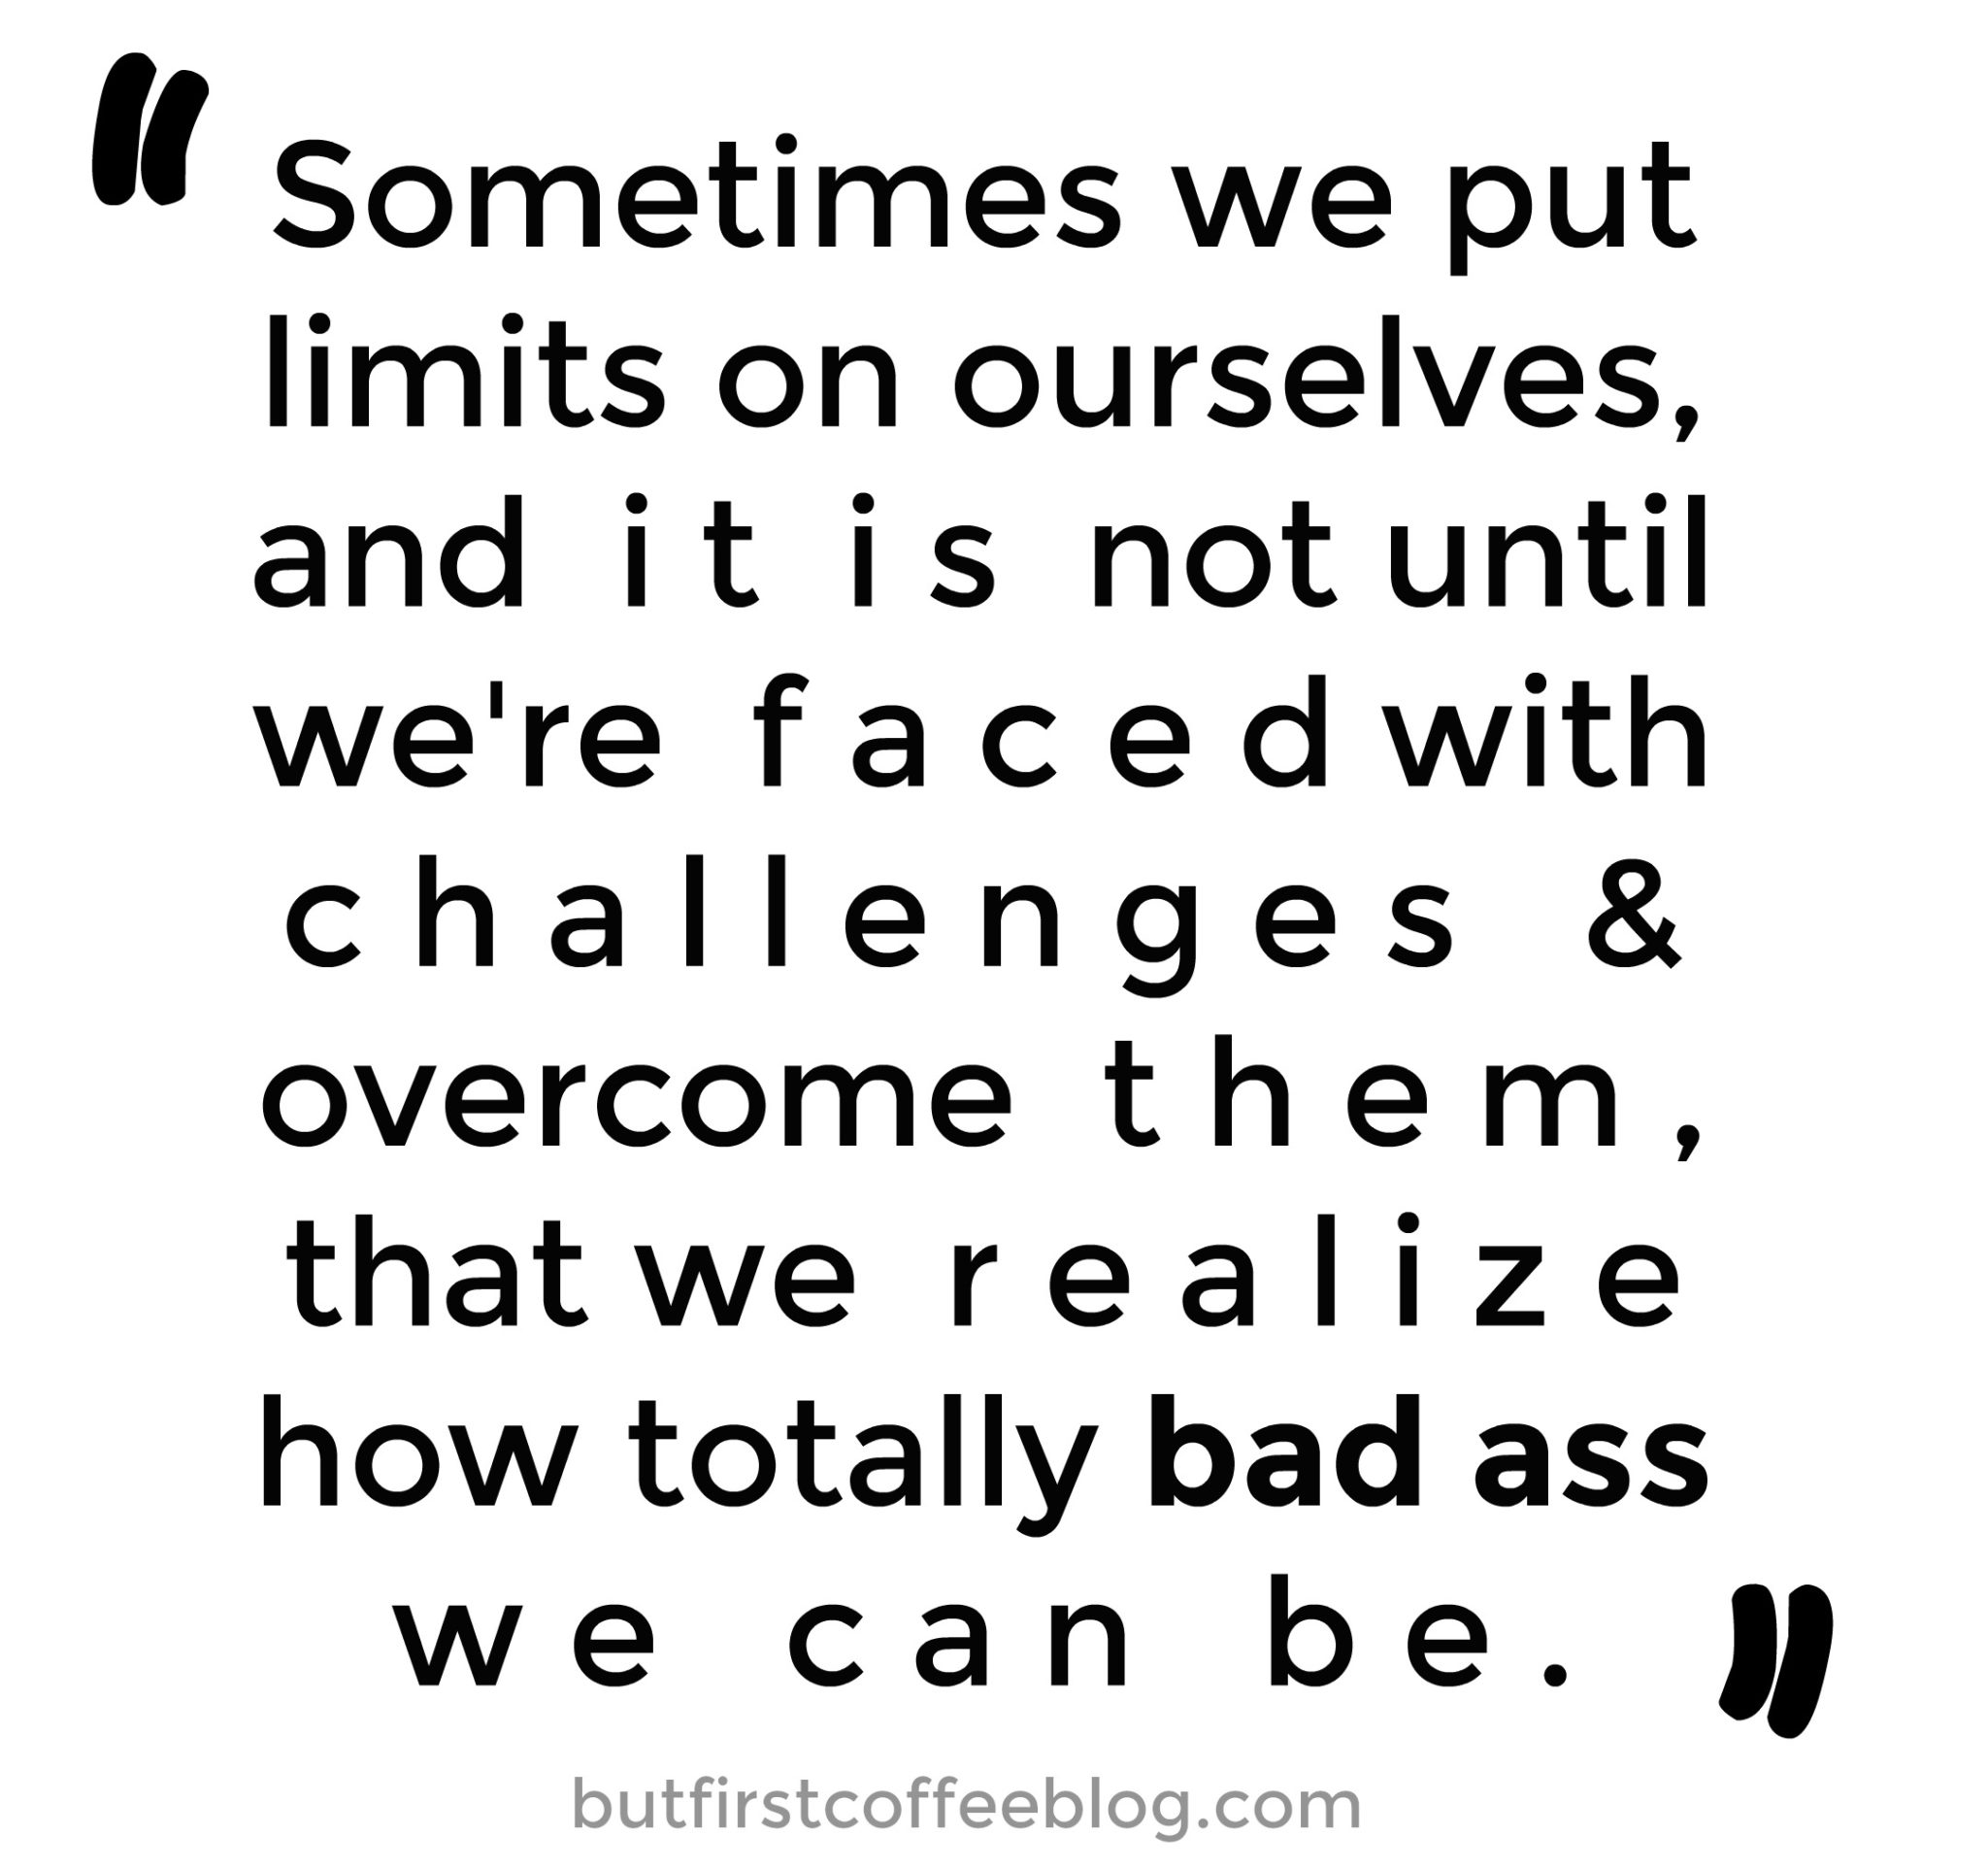 Sometimes we put limits on ourselves and it is not until we're faced with challenges and overcome them that we realize how totally bad ass we can be